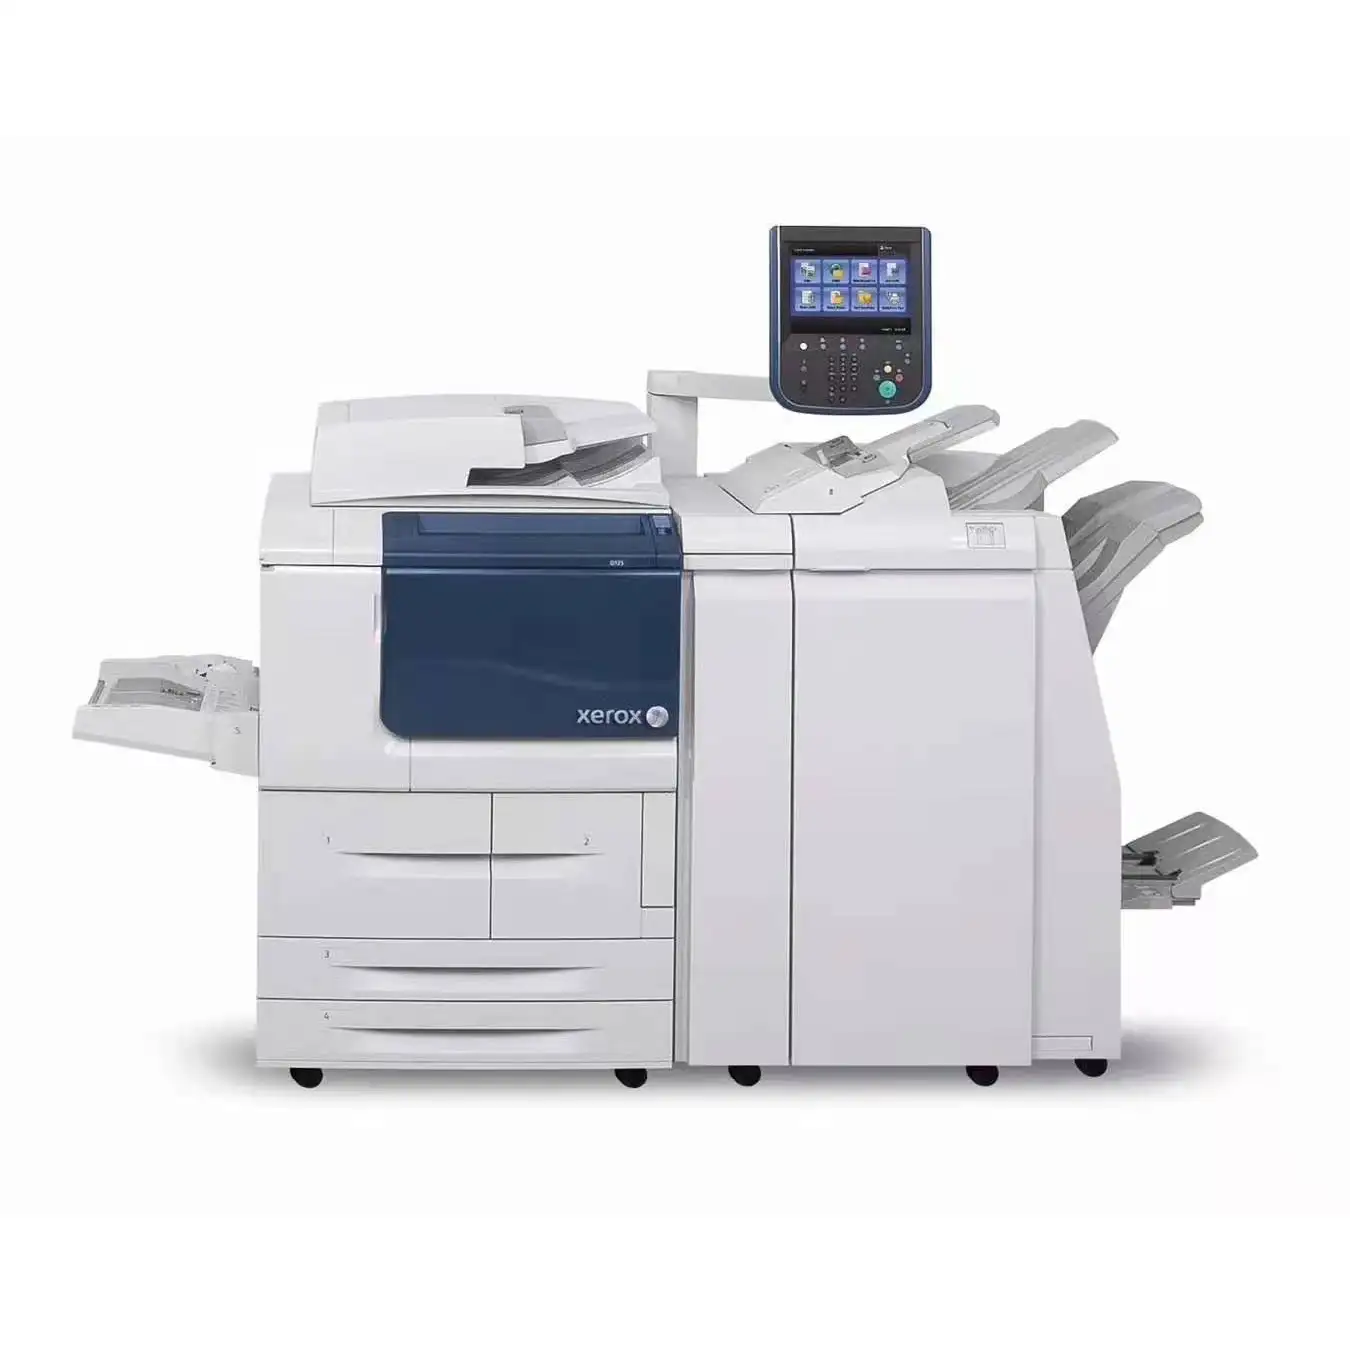 Refurbished d95 copymachine reconditioned 125ppm second hand copiers black and white printers low price machine